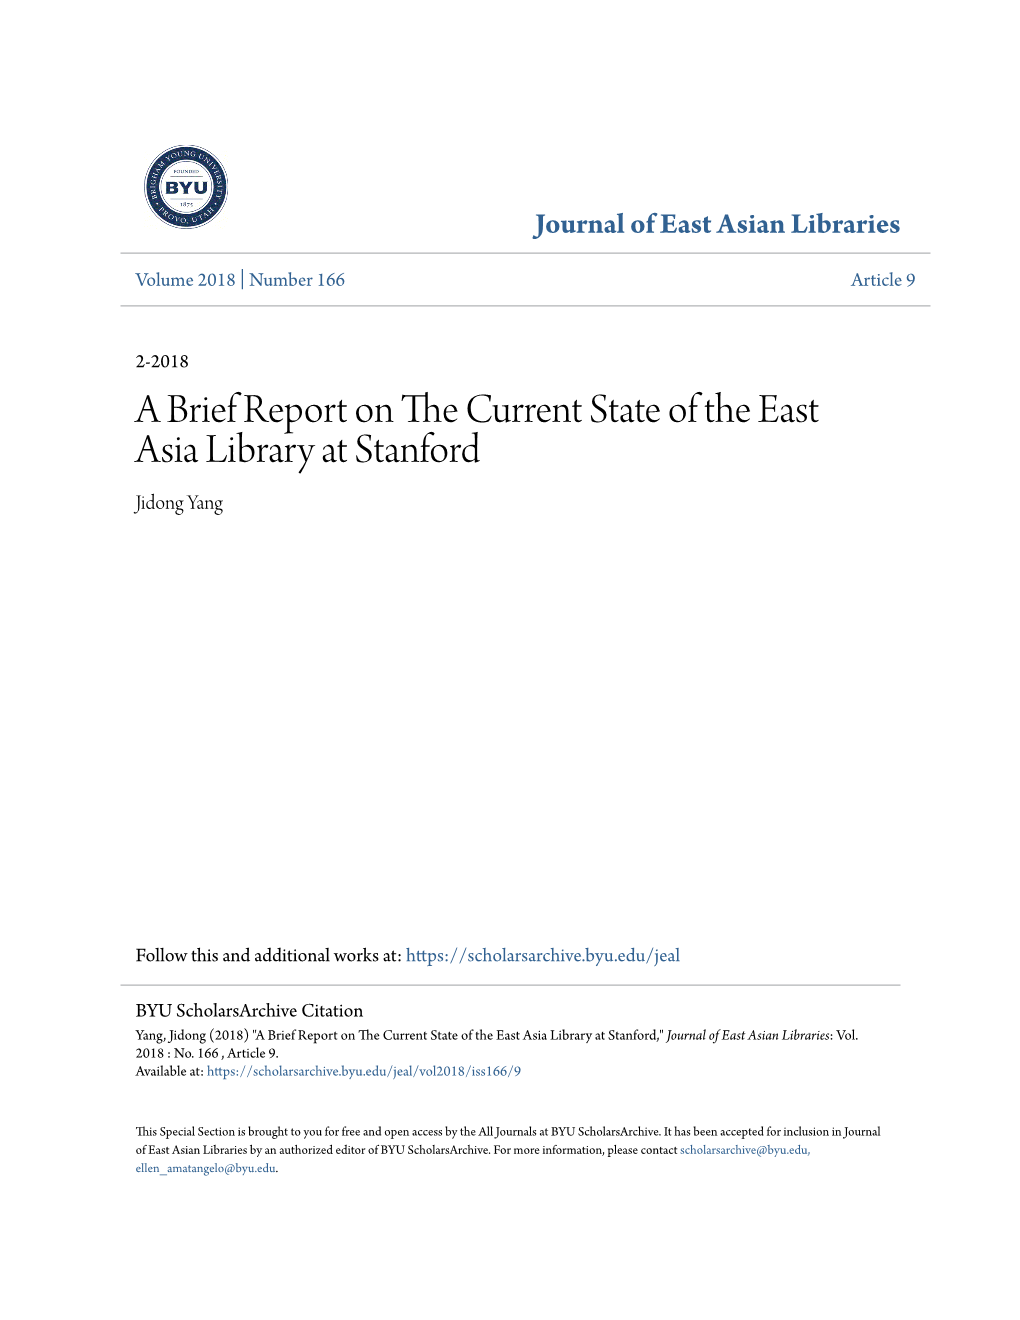 A Brief Report on the Current State of the East Asia Library at Stanford